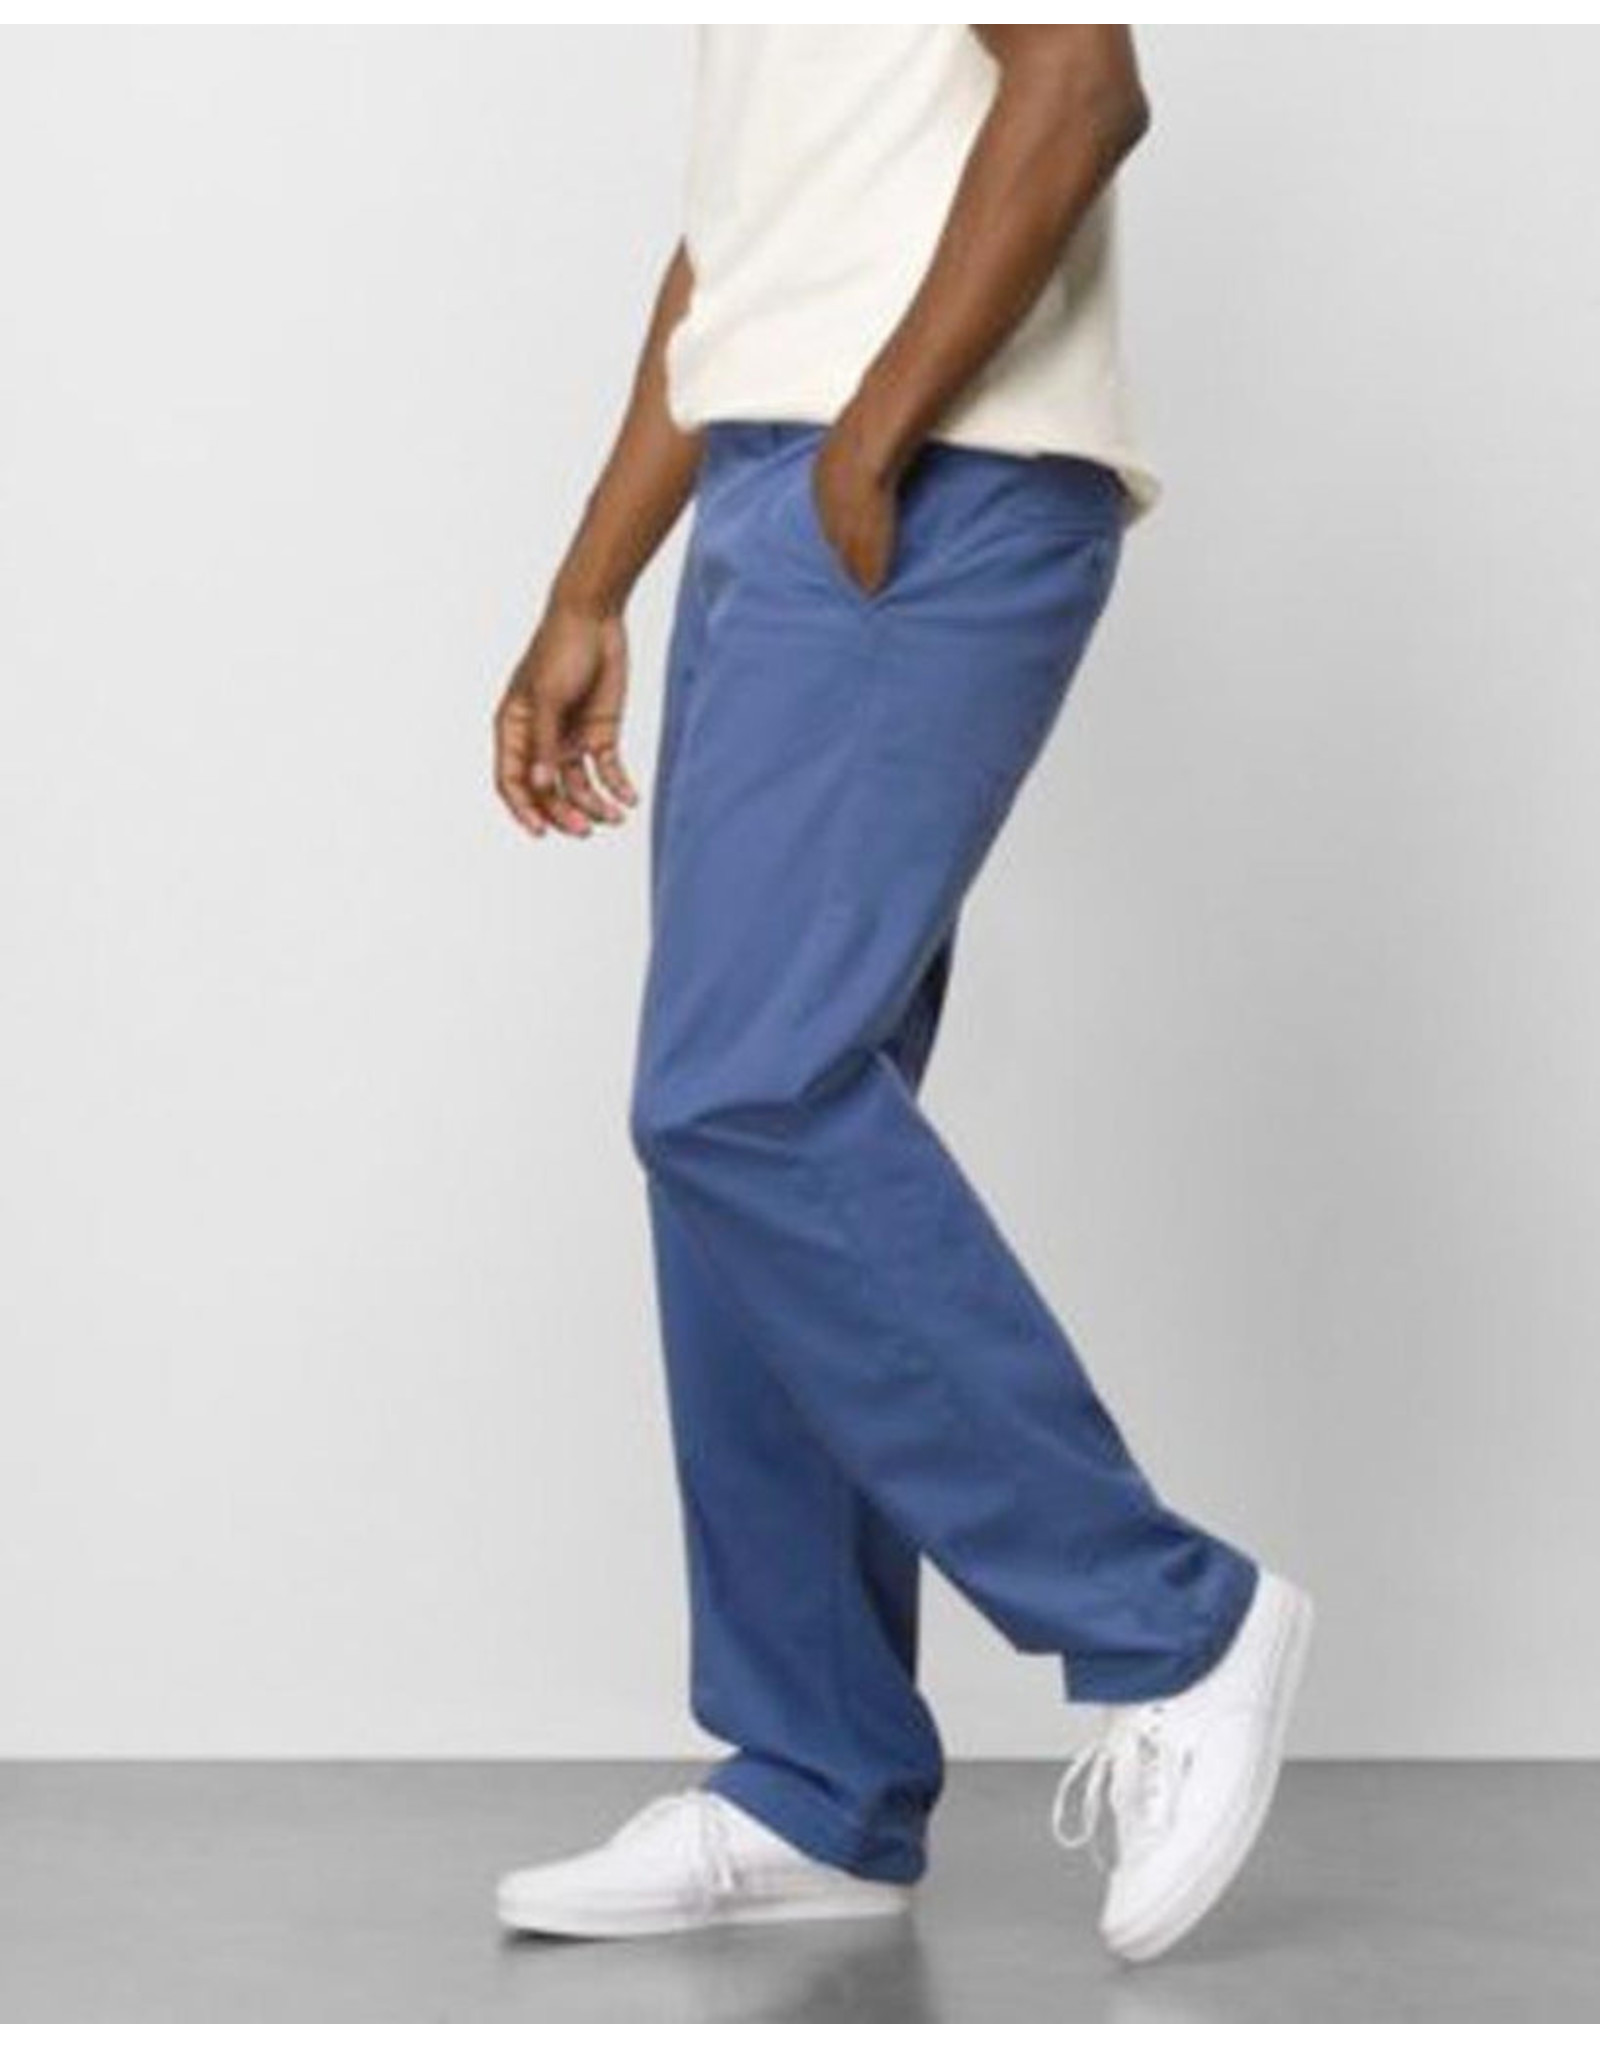 Vans Authentic Relaxed Chino Pant